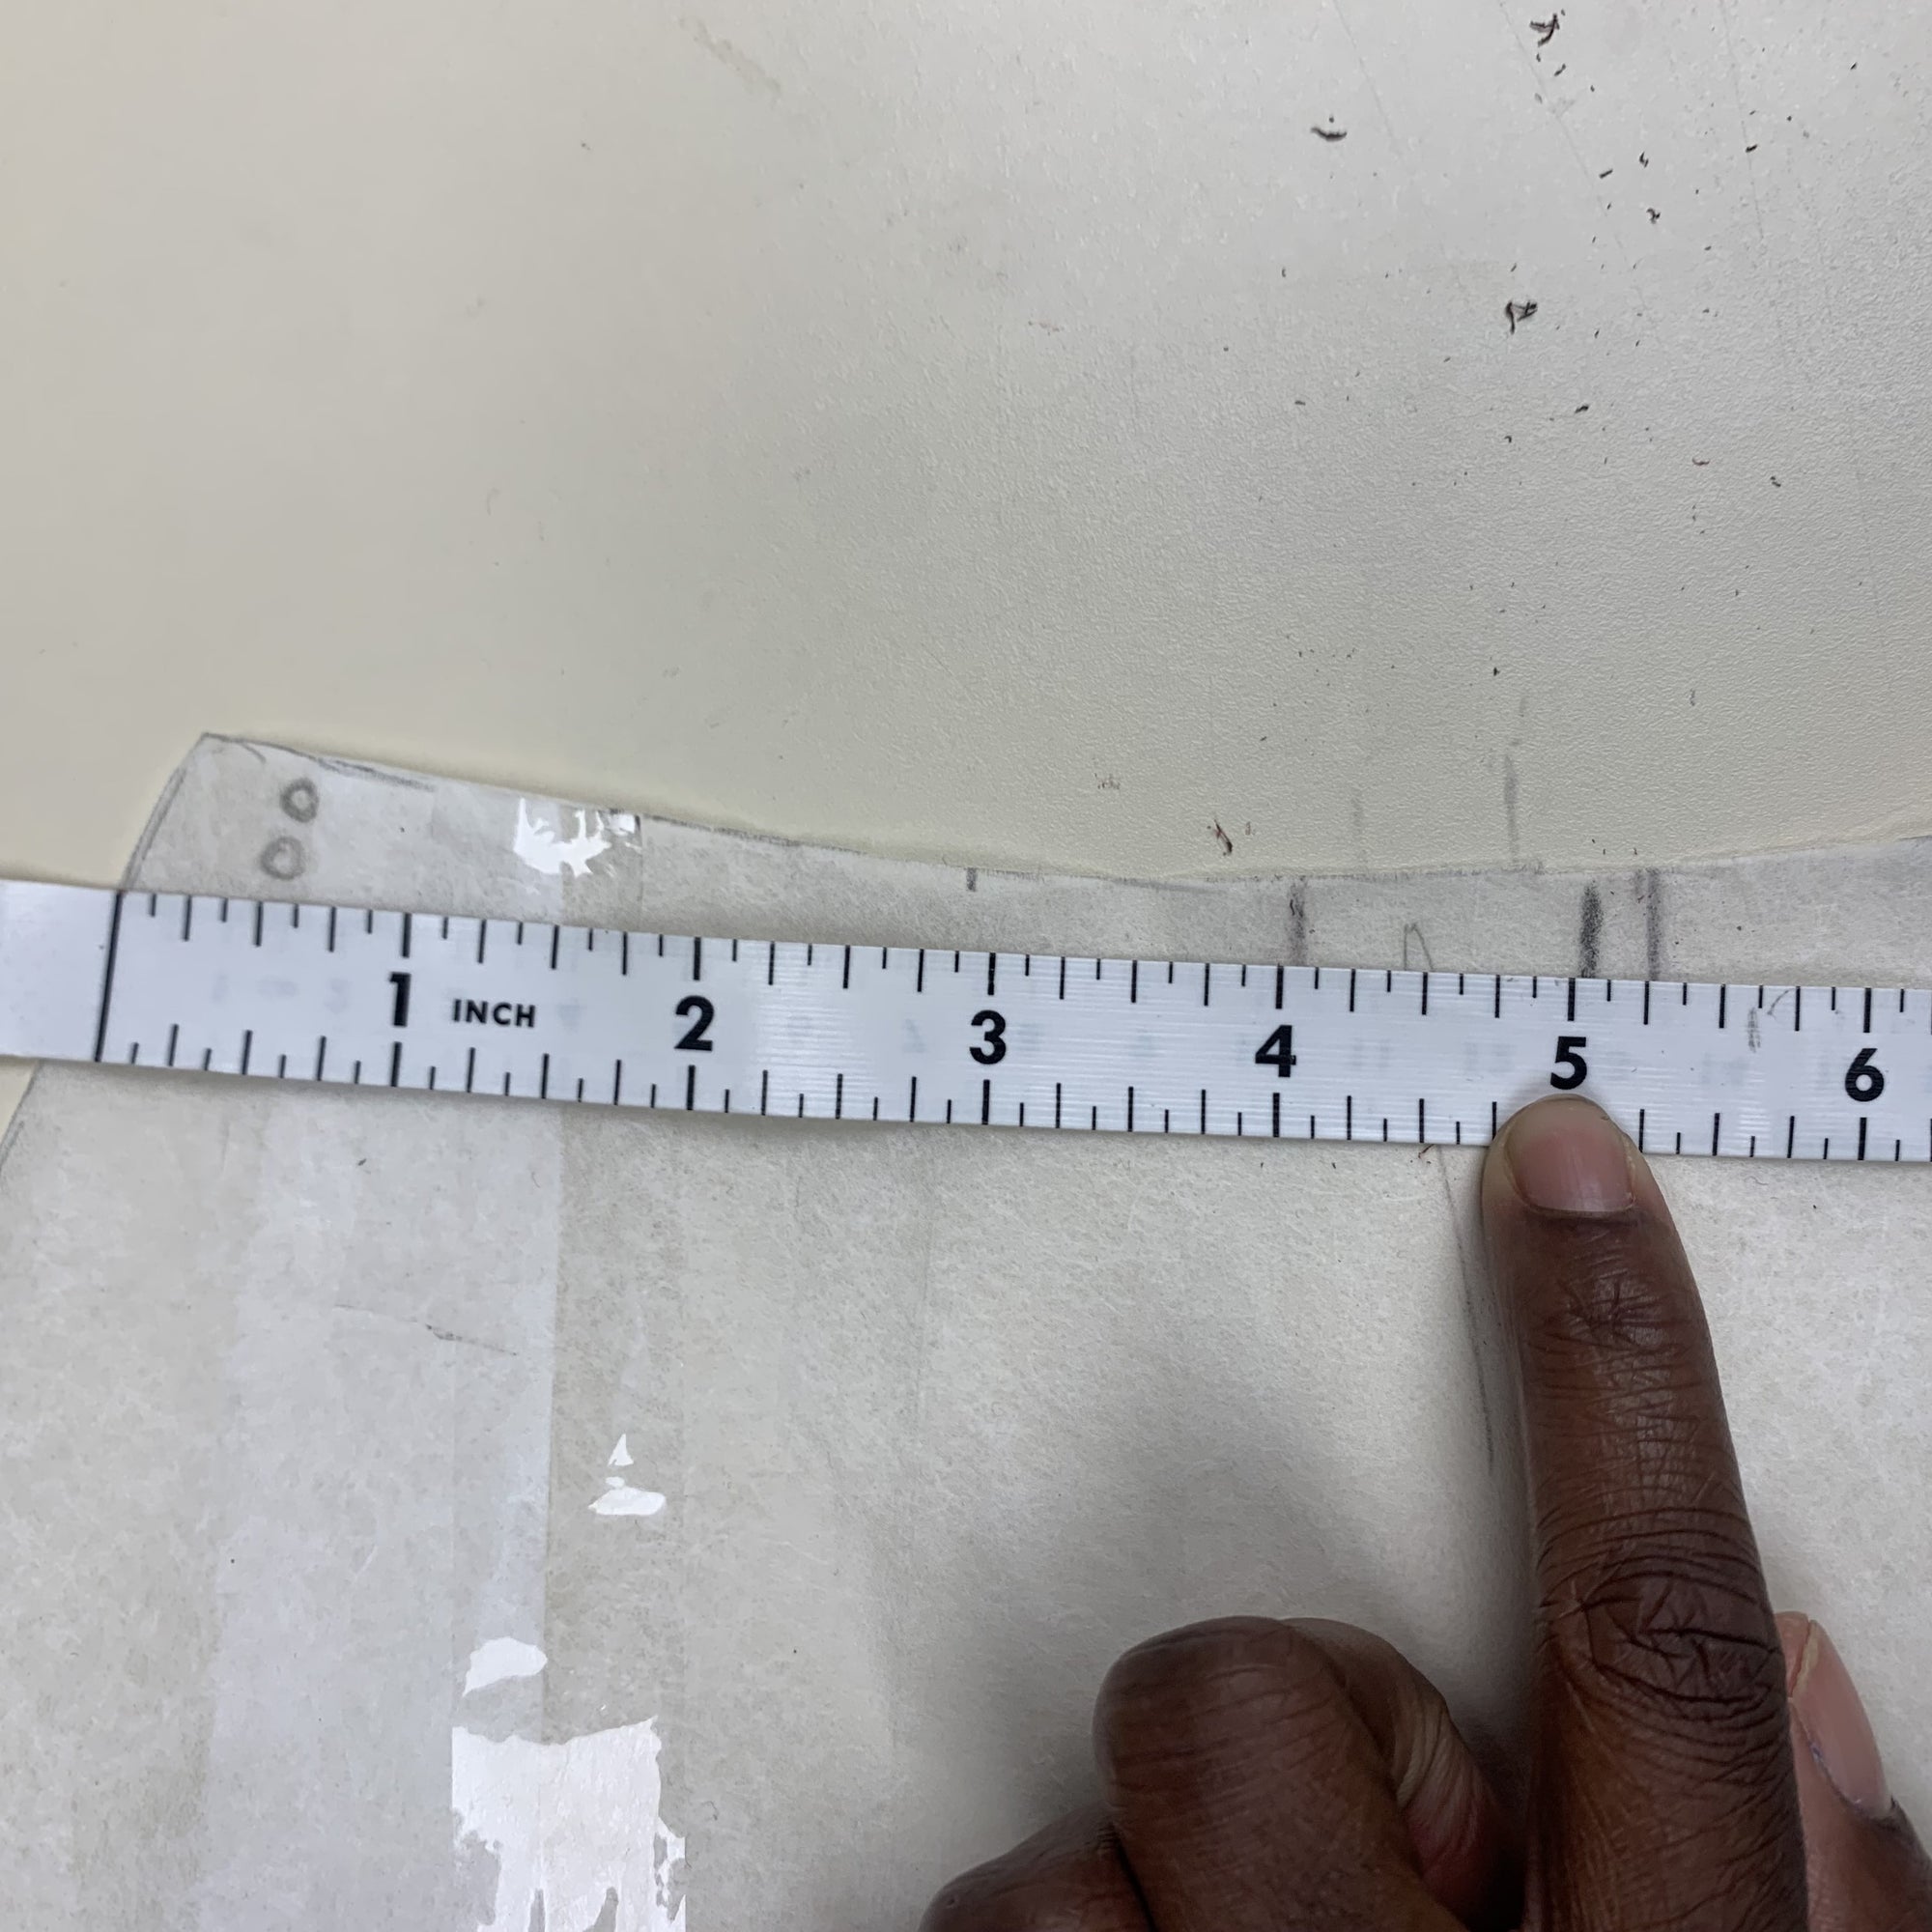 A tape measure, measuring 5 inches from the side of the back B pieces in towards the center back. On fabric tracing paper on a beige background.